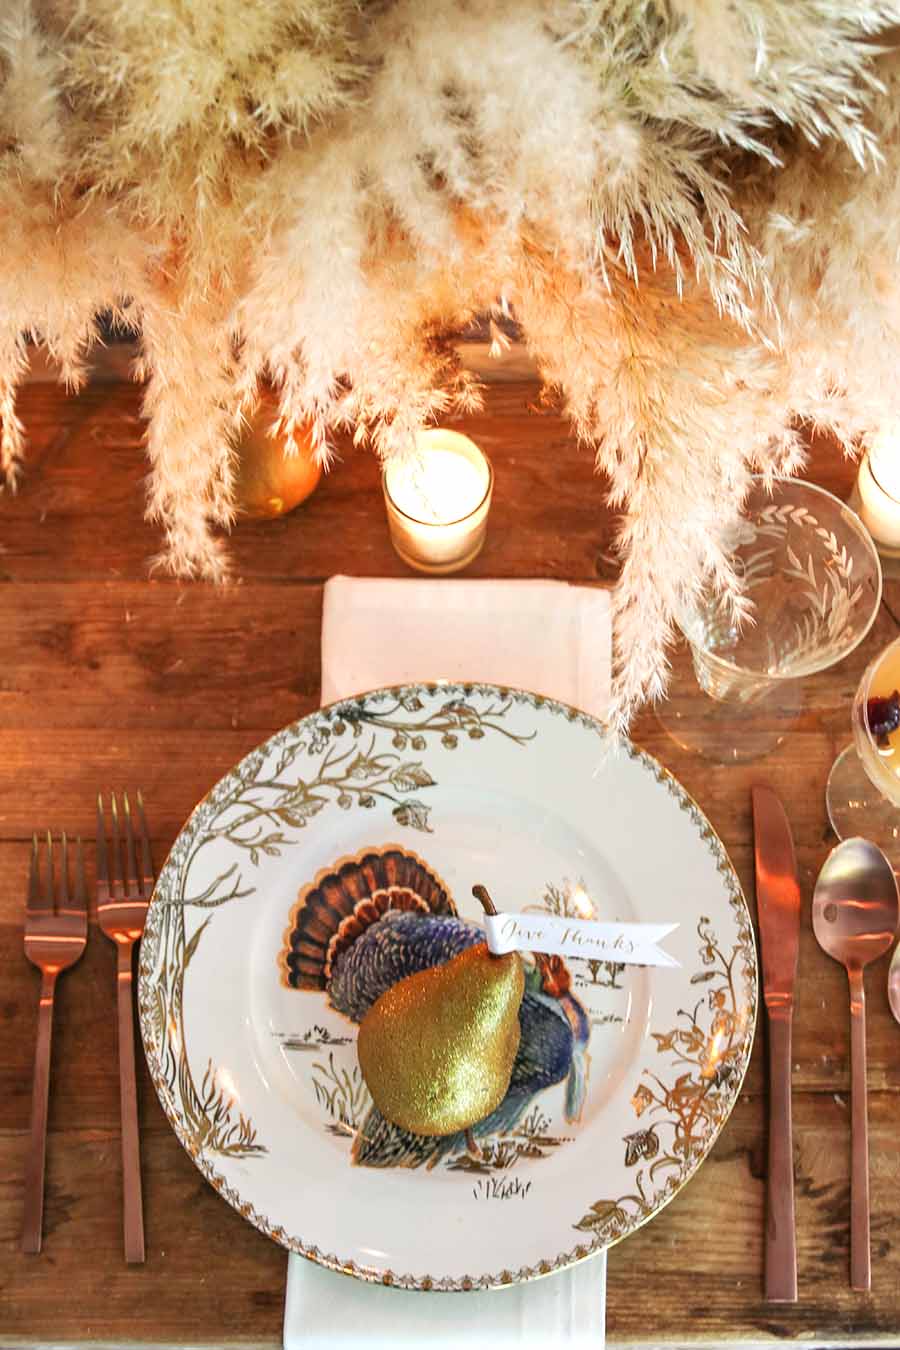 Thanksgiving Place Setting Ideas